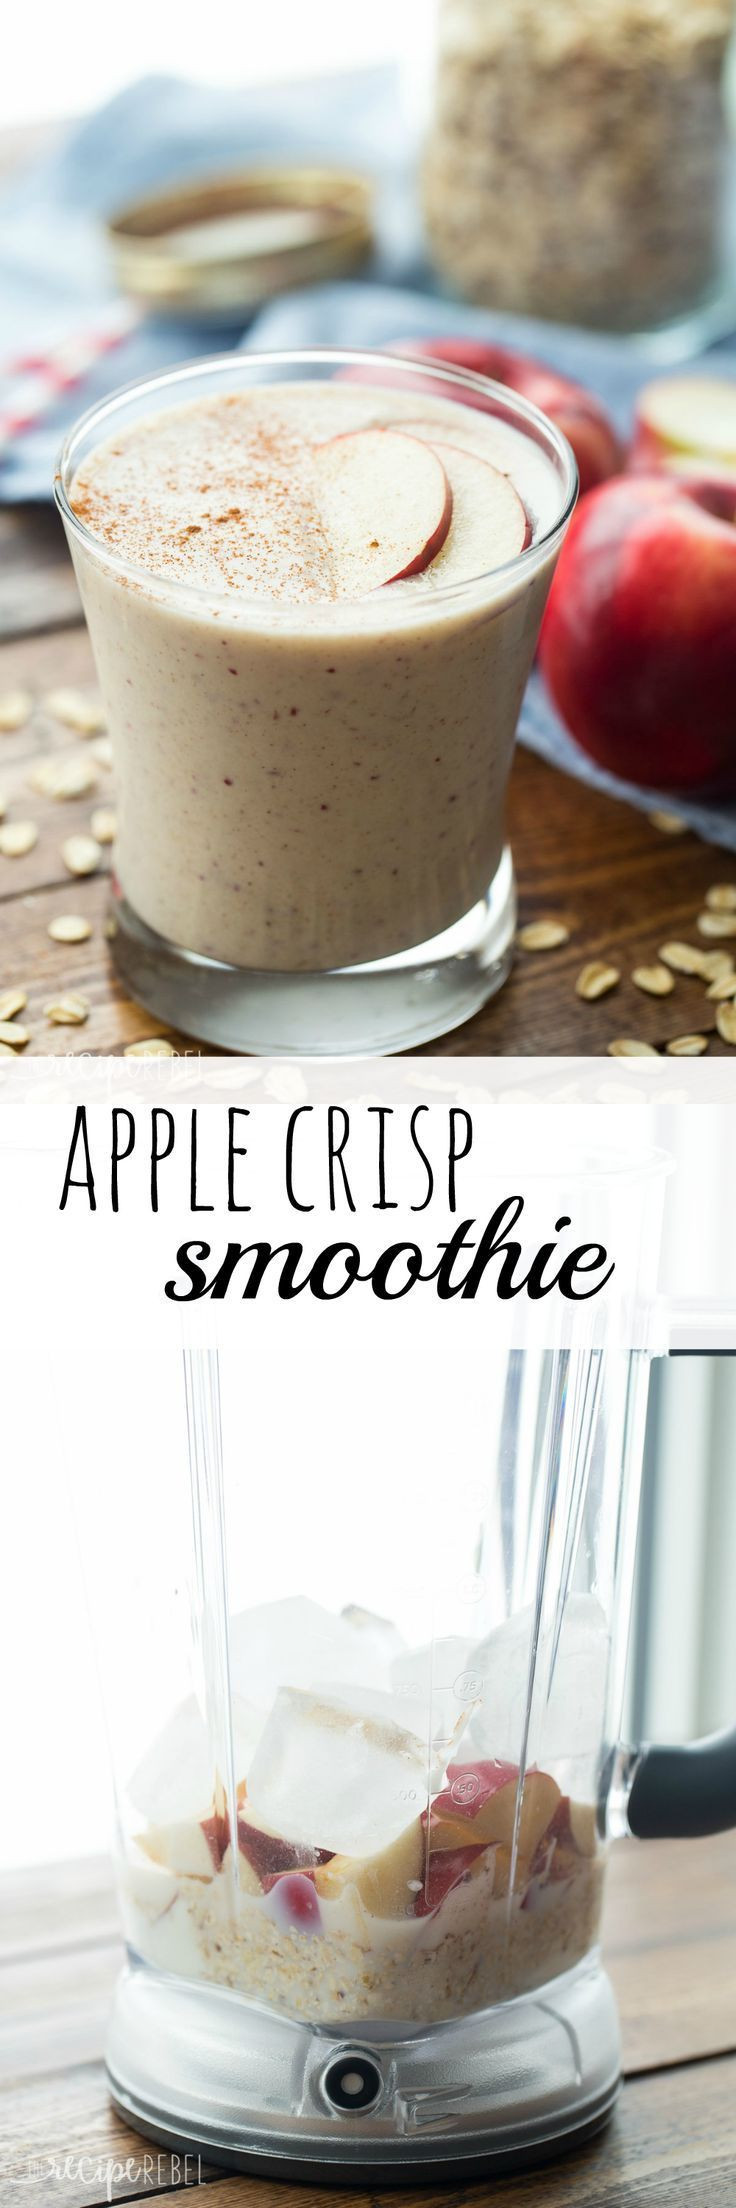 Best Healthy Breakfast Smoothies
 25 best ideas about Smoothie on Pinterest